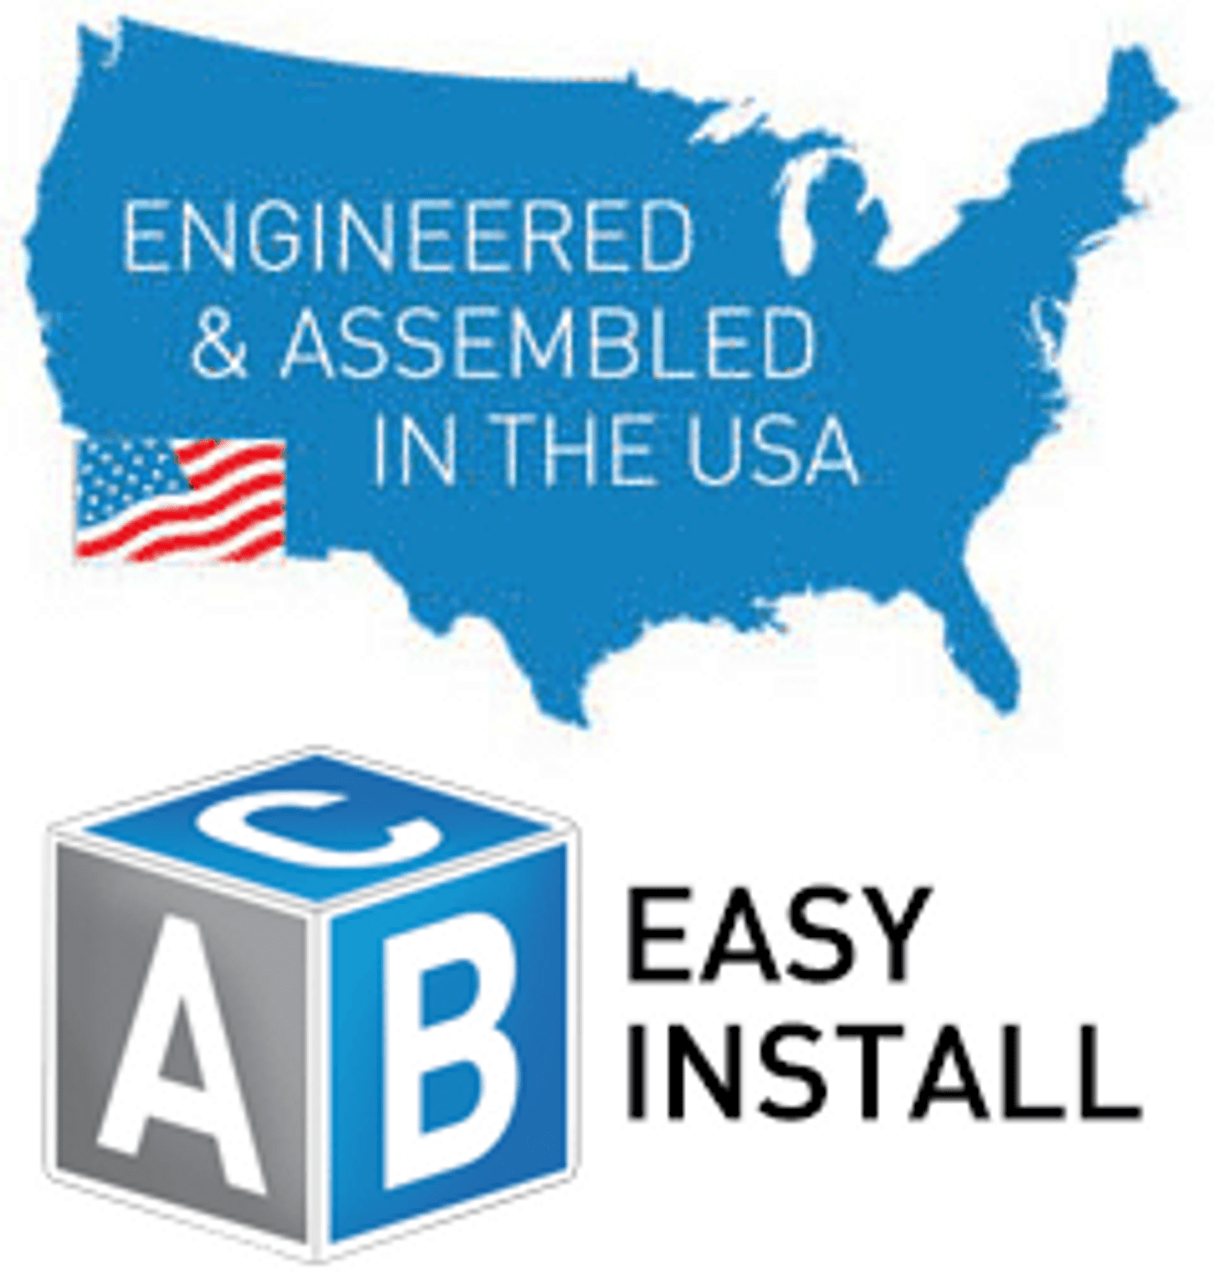 Made in USA & Easy to Install